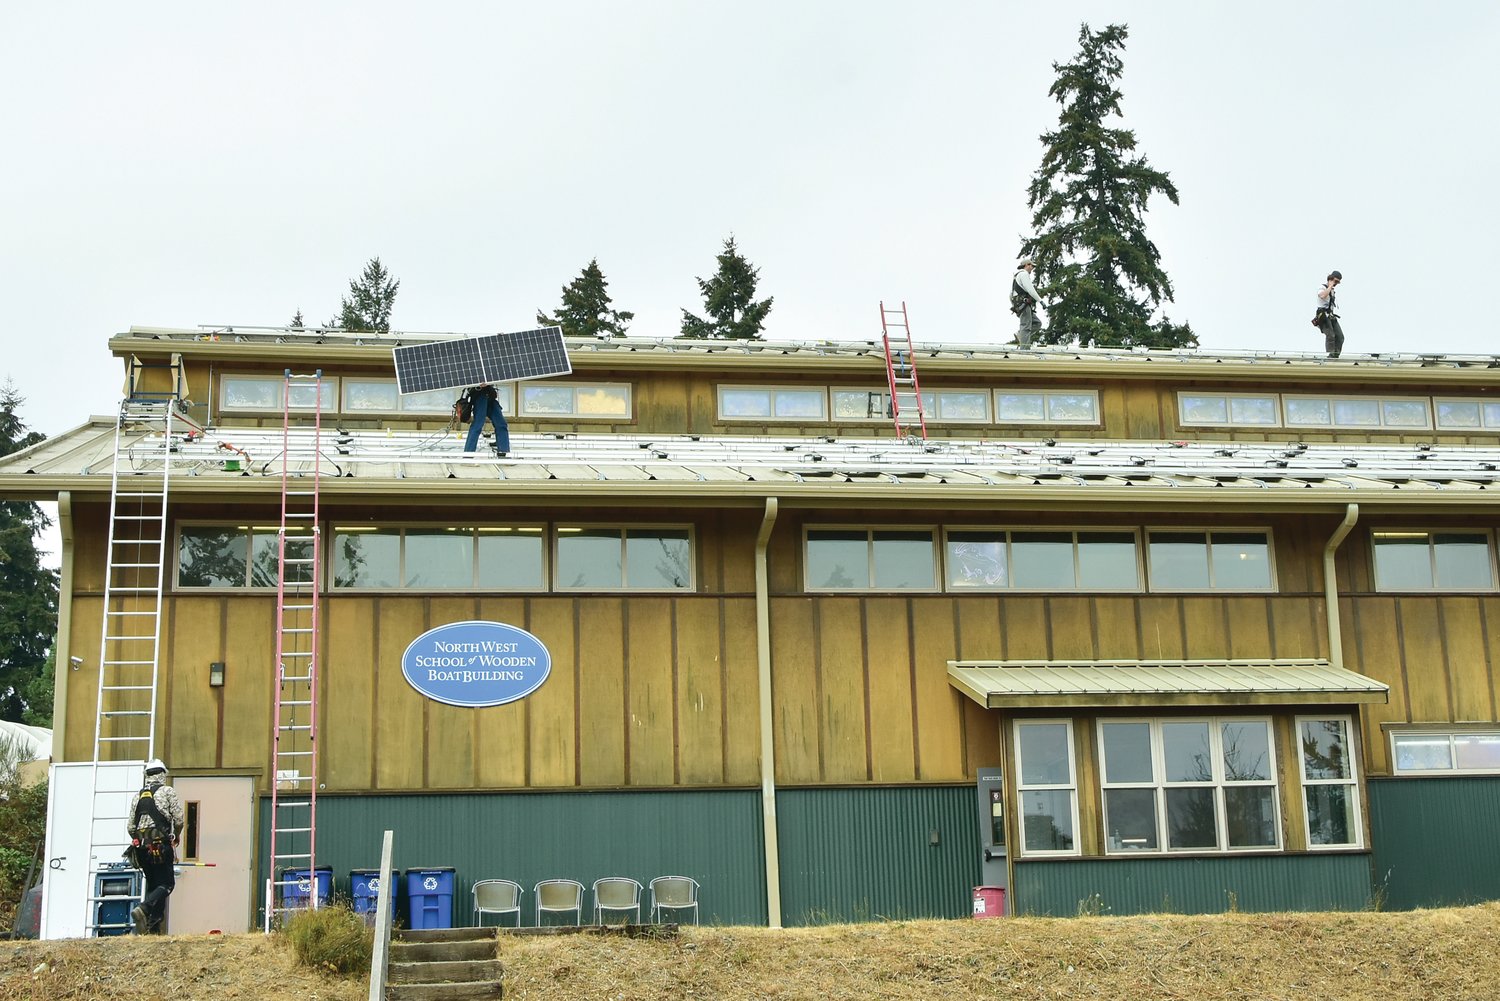 Workers set up solar panels at the Northwest School of Wooden Boatbuilding in Port Hadlock. The project was finished in November.